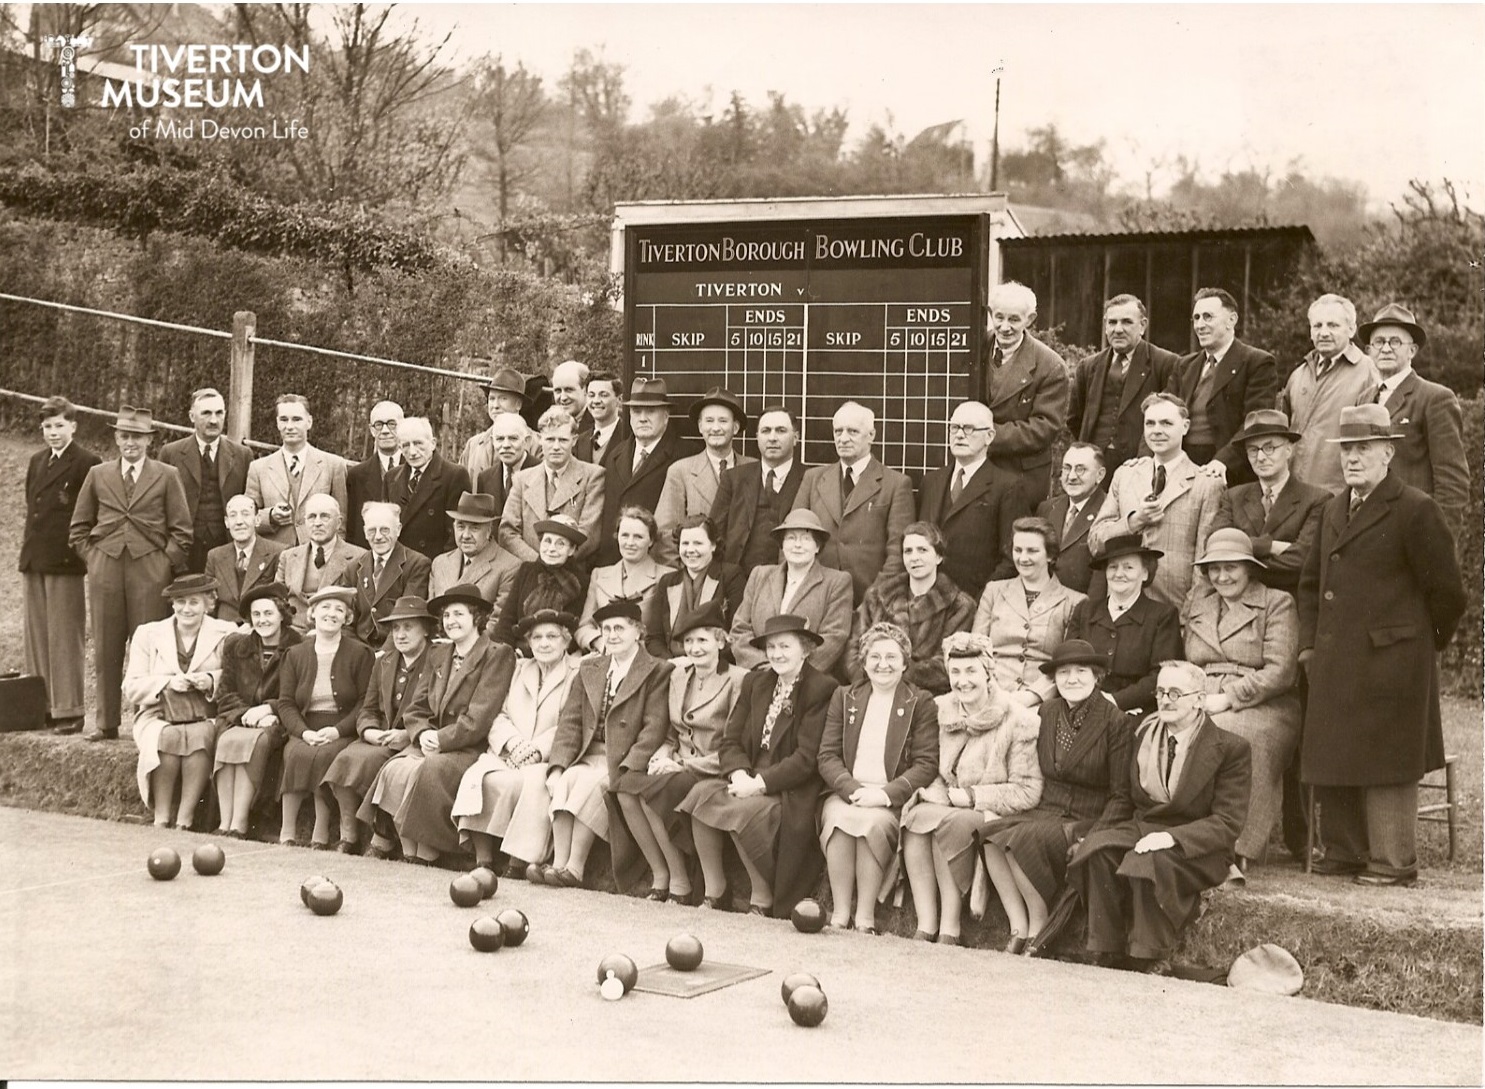 A group of men and women seated and standing in three rows on the edged of a bowling green in front of a board that reads 'Tiverton Borough Bowling Club' with a system for keep score below. The woman are all wearing overcoats and skirts and the men are wearing overcoats or jackets. Lots of the women and some of the men are wearing hats. There are some bowling balls on the ground in front of them.